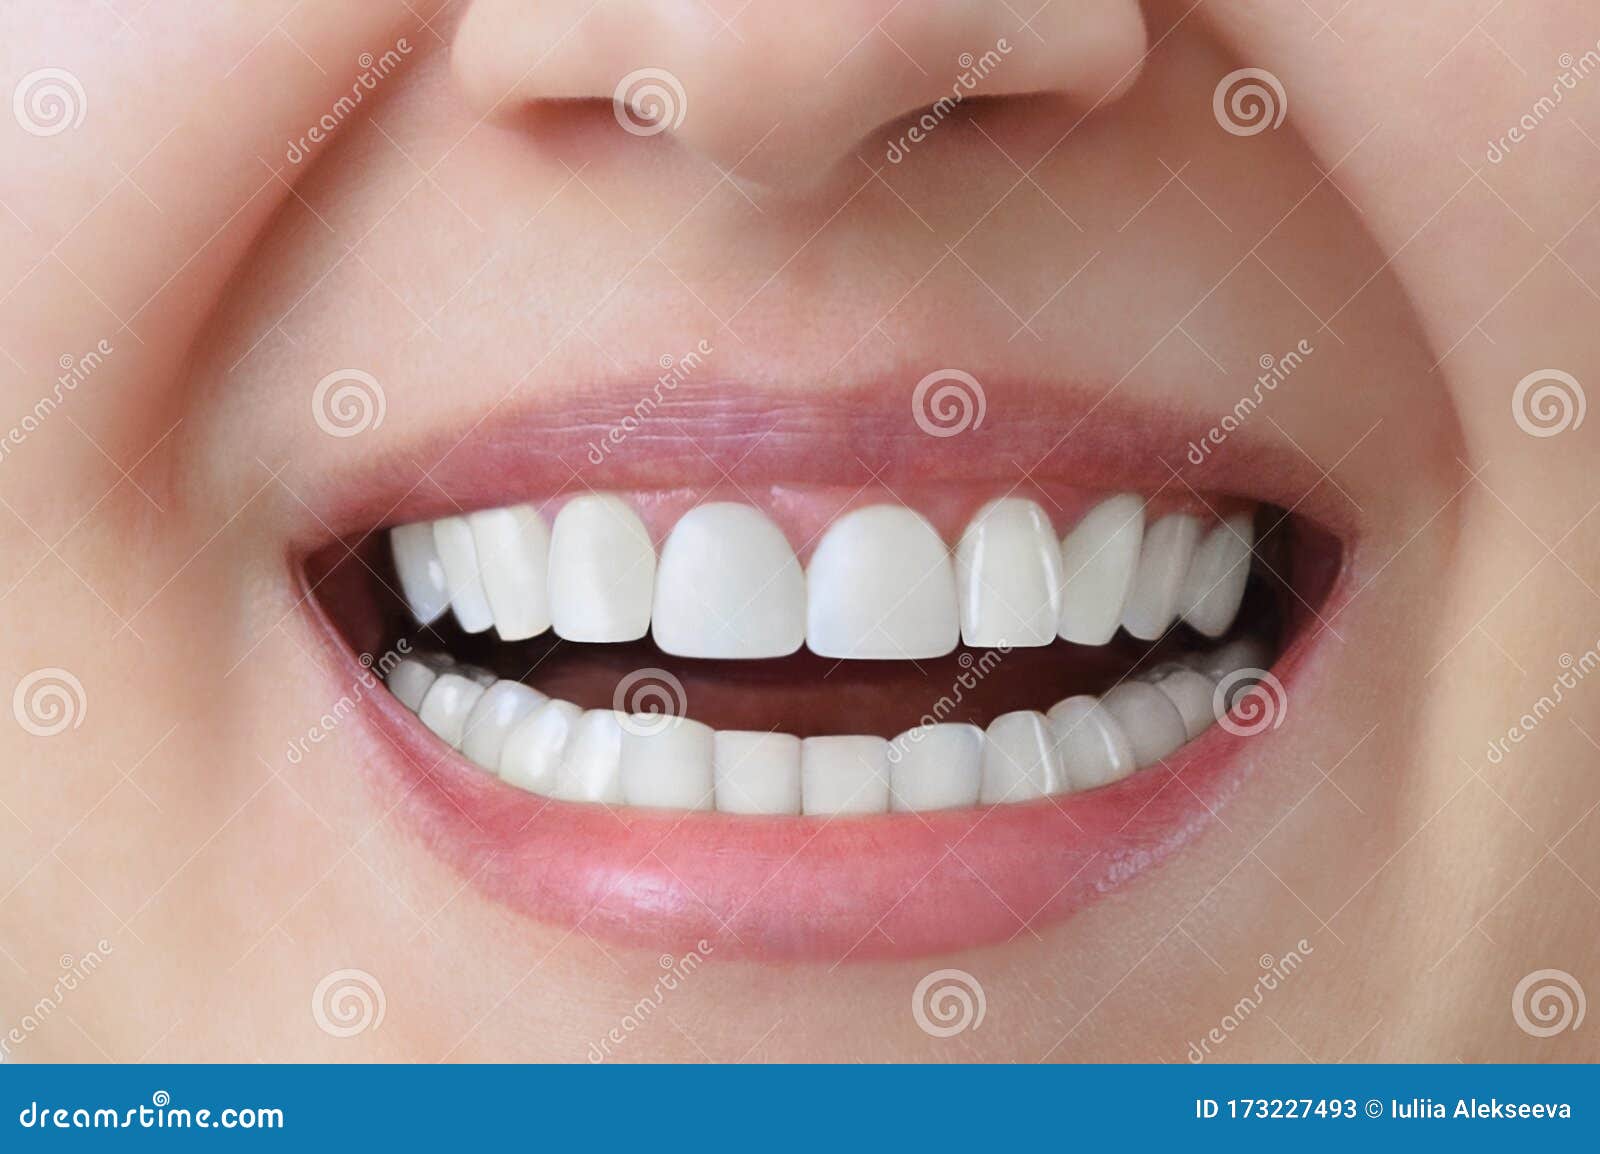 white teeth of a caucasian woman after treatment and whitening of teeth, dental crowns.